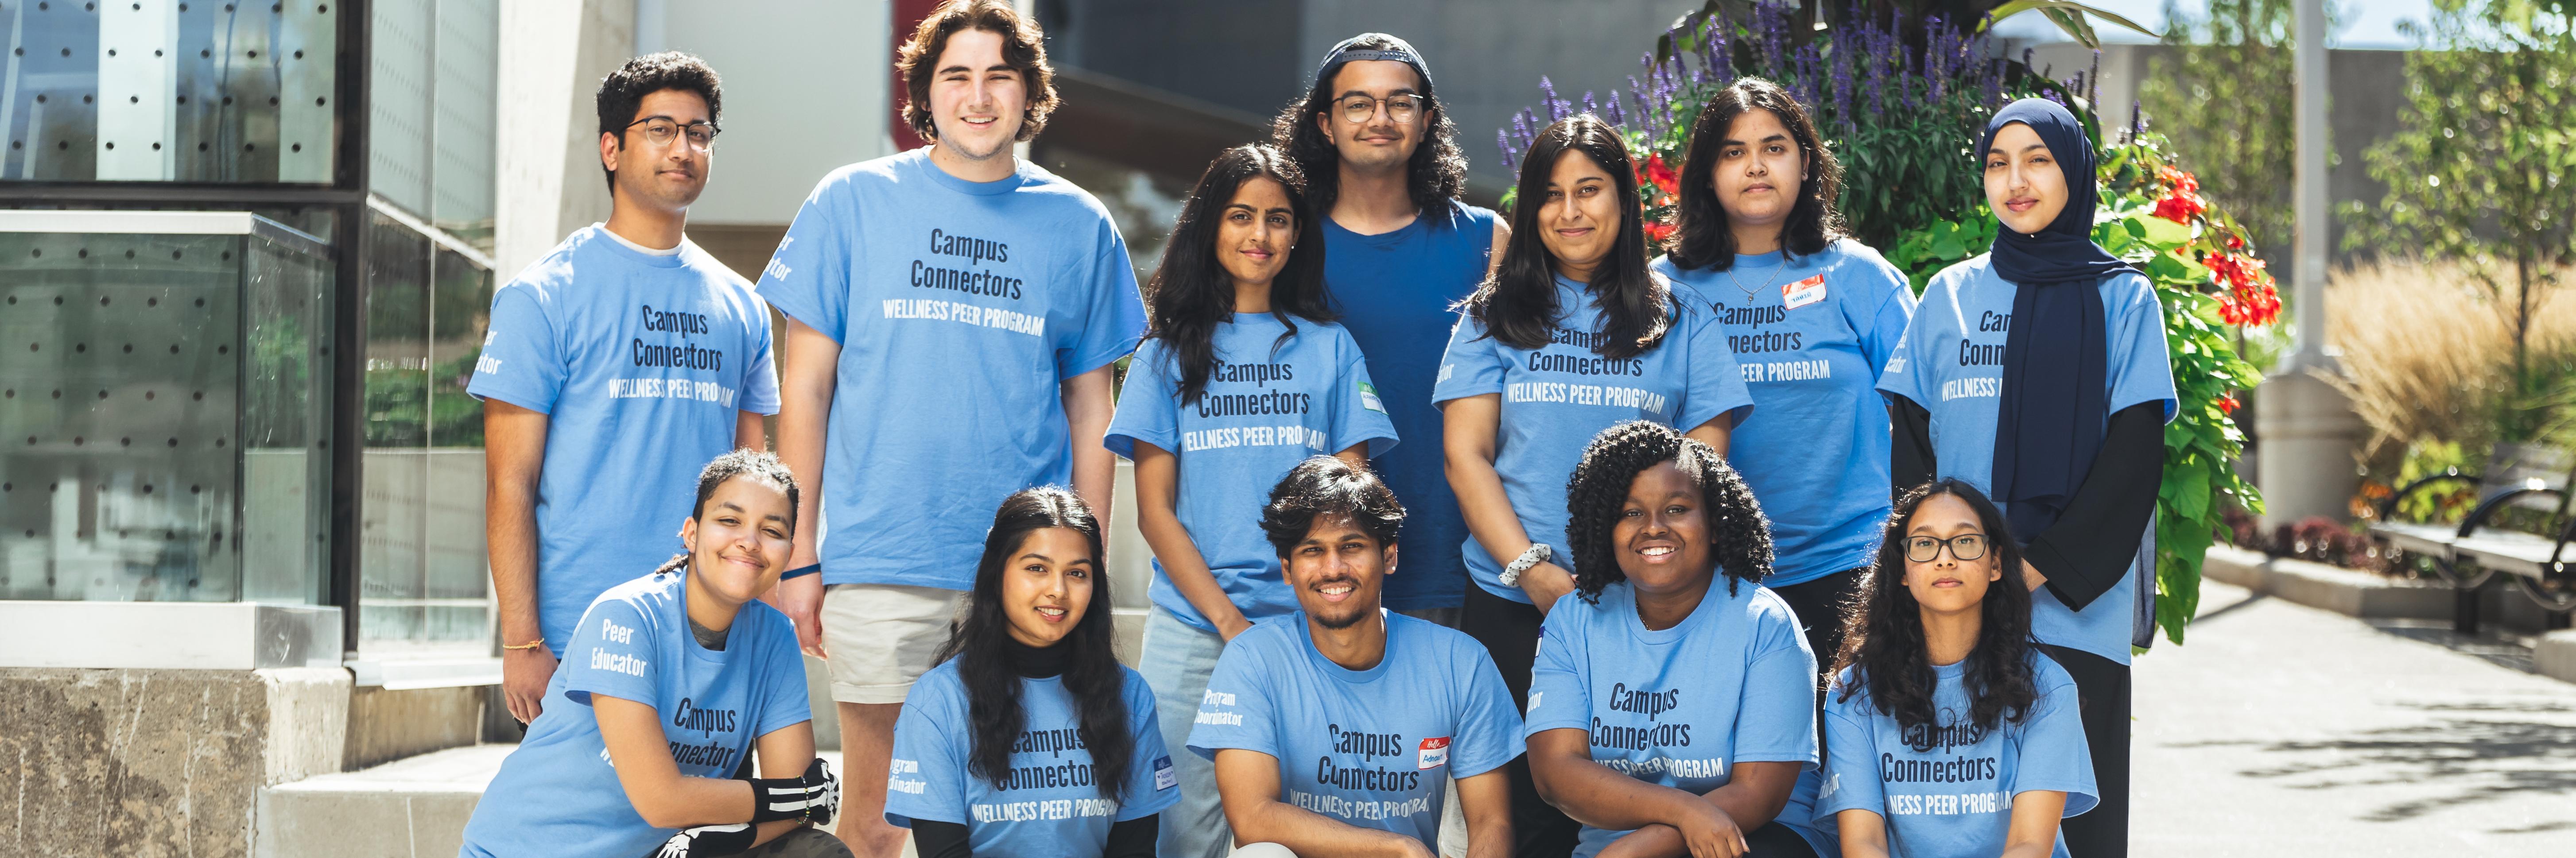 Group of 12 students in the Campus Connectors Team wearing uniform Wellness Peer Program shirts